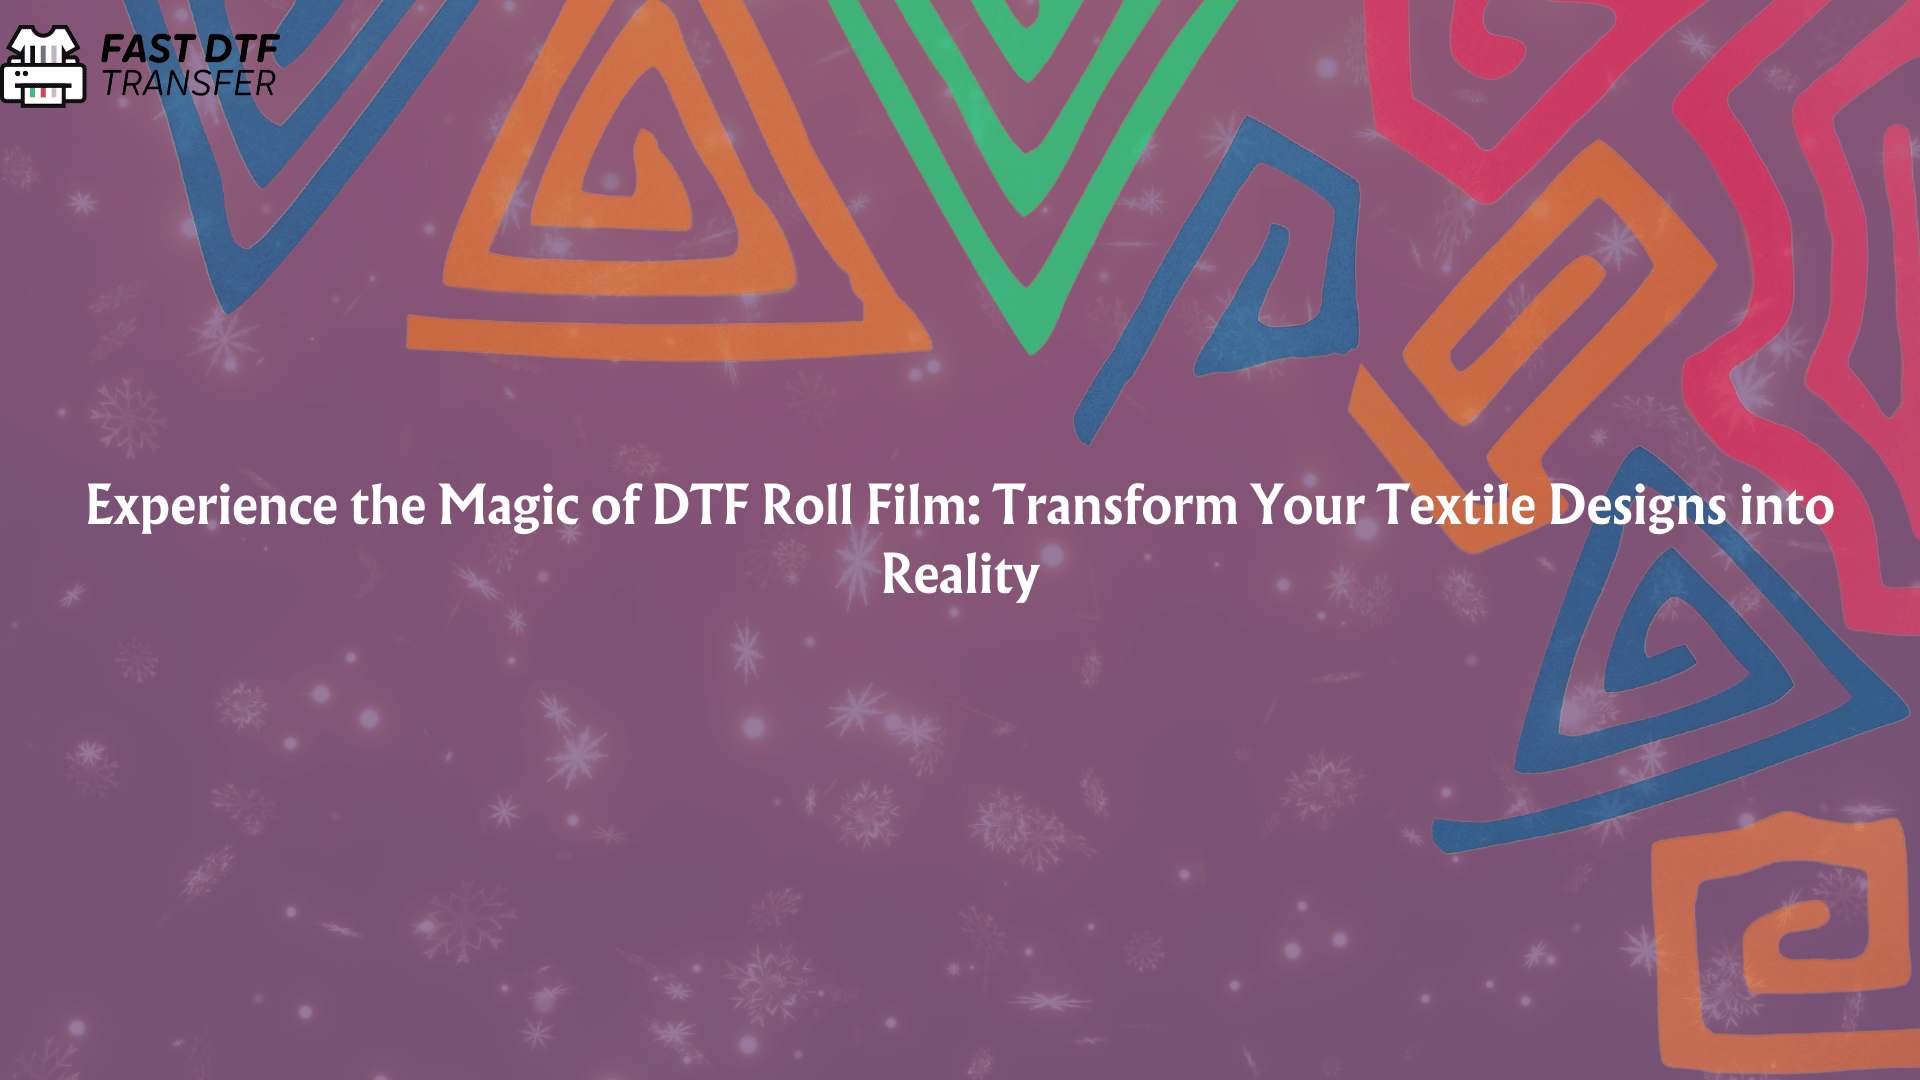 Experience the Magic of DTF Roll Film: Transform Your Textile Designs into Reality